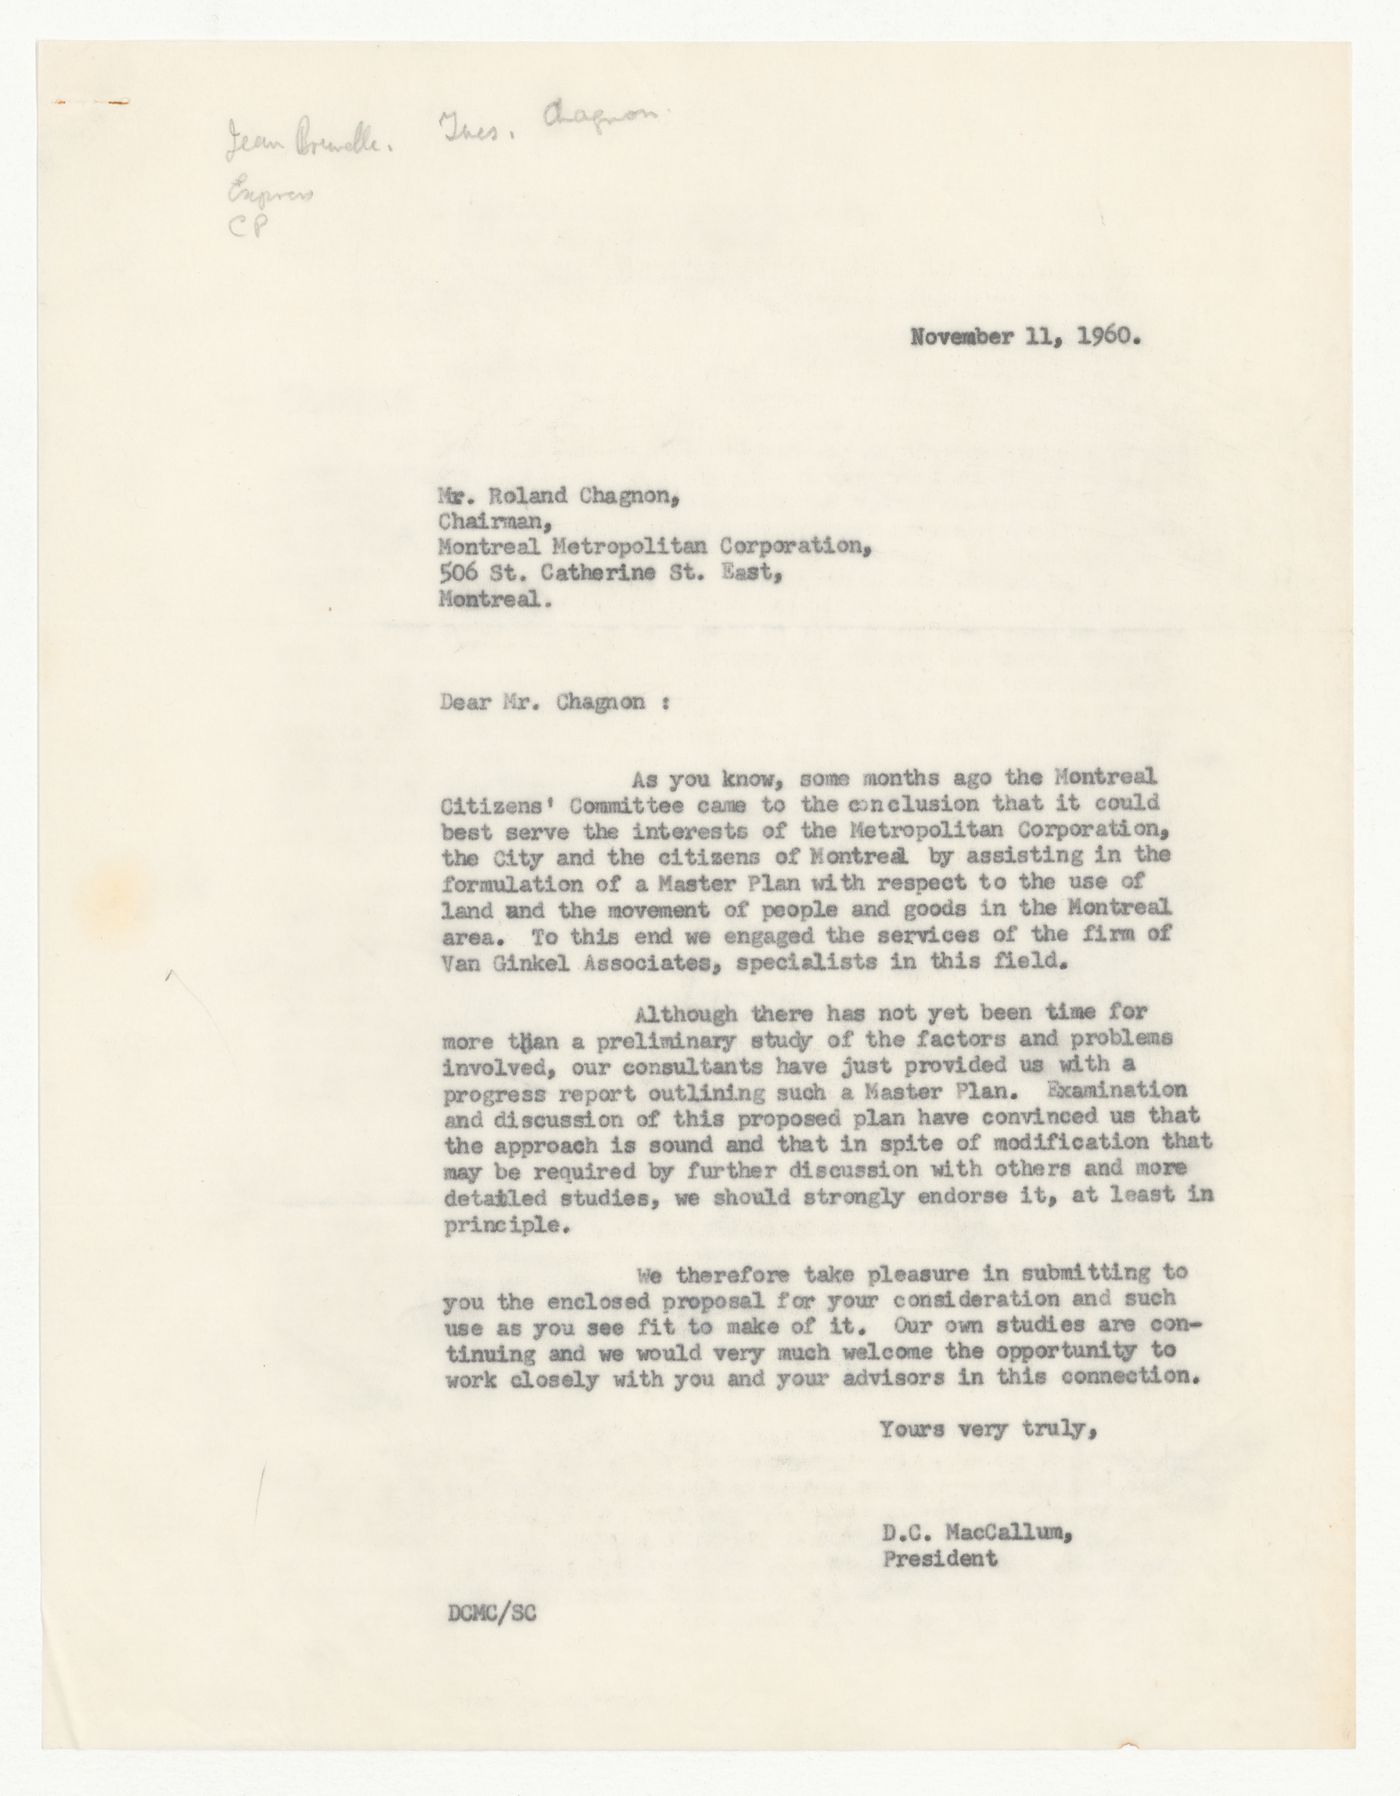 Letter from D. C. MacCollum to Roland Chagnon about Central Area Circulation, Montreal